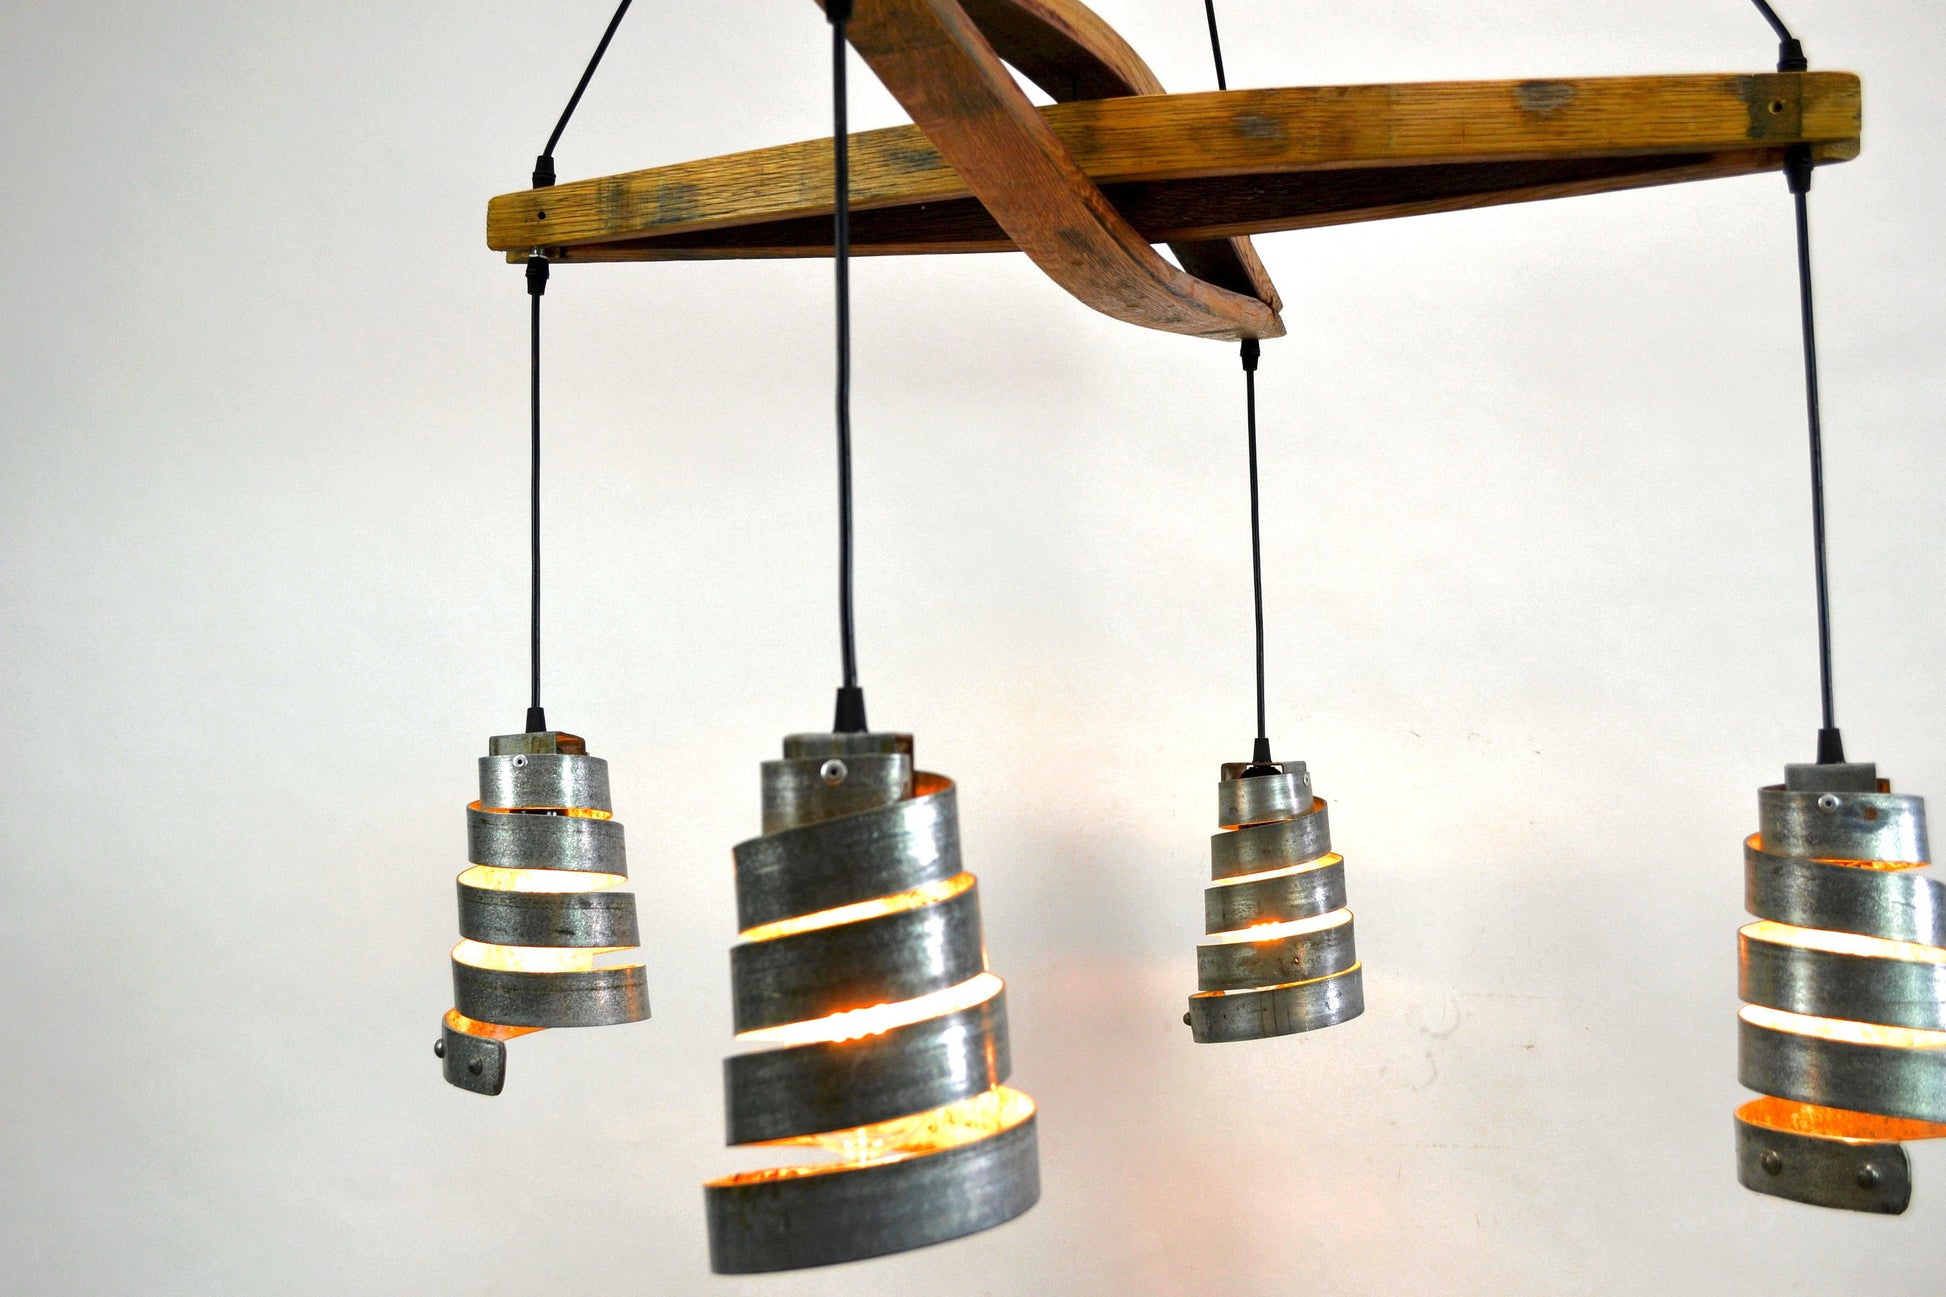 Wine Barrel Ring Chandelier - Samofin - Made from retired CA wine barrels. 100% Recycled!